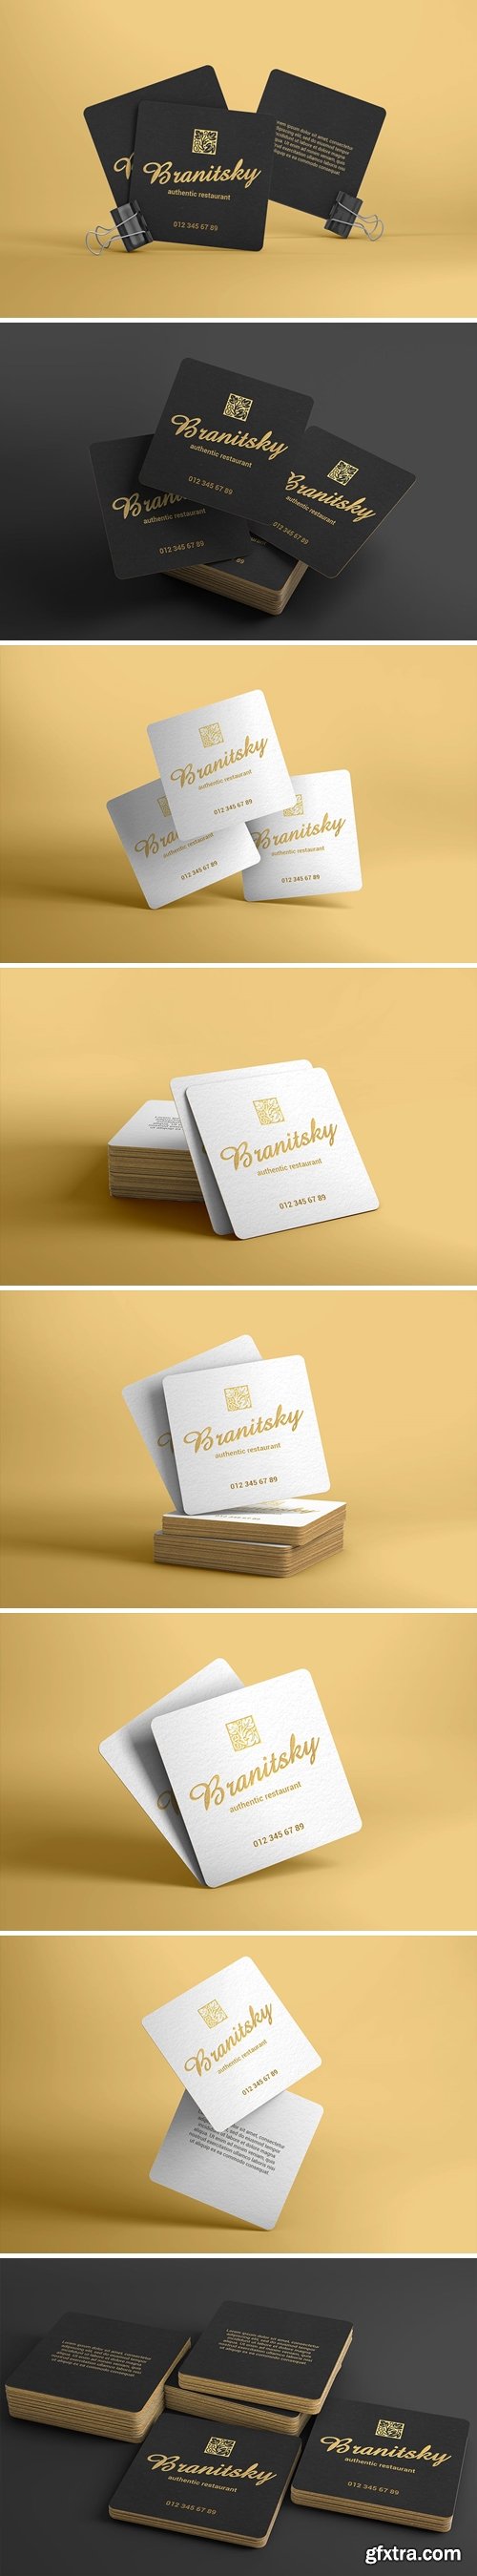 Square Business Card With Rounded Corners Mockups